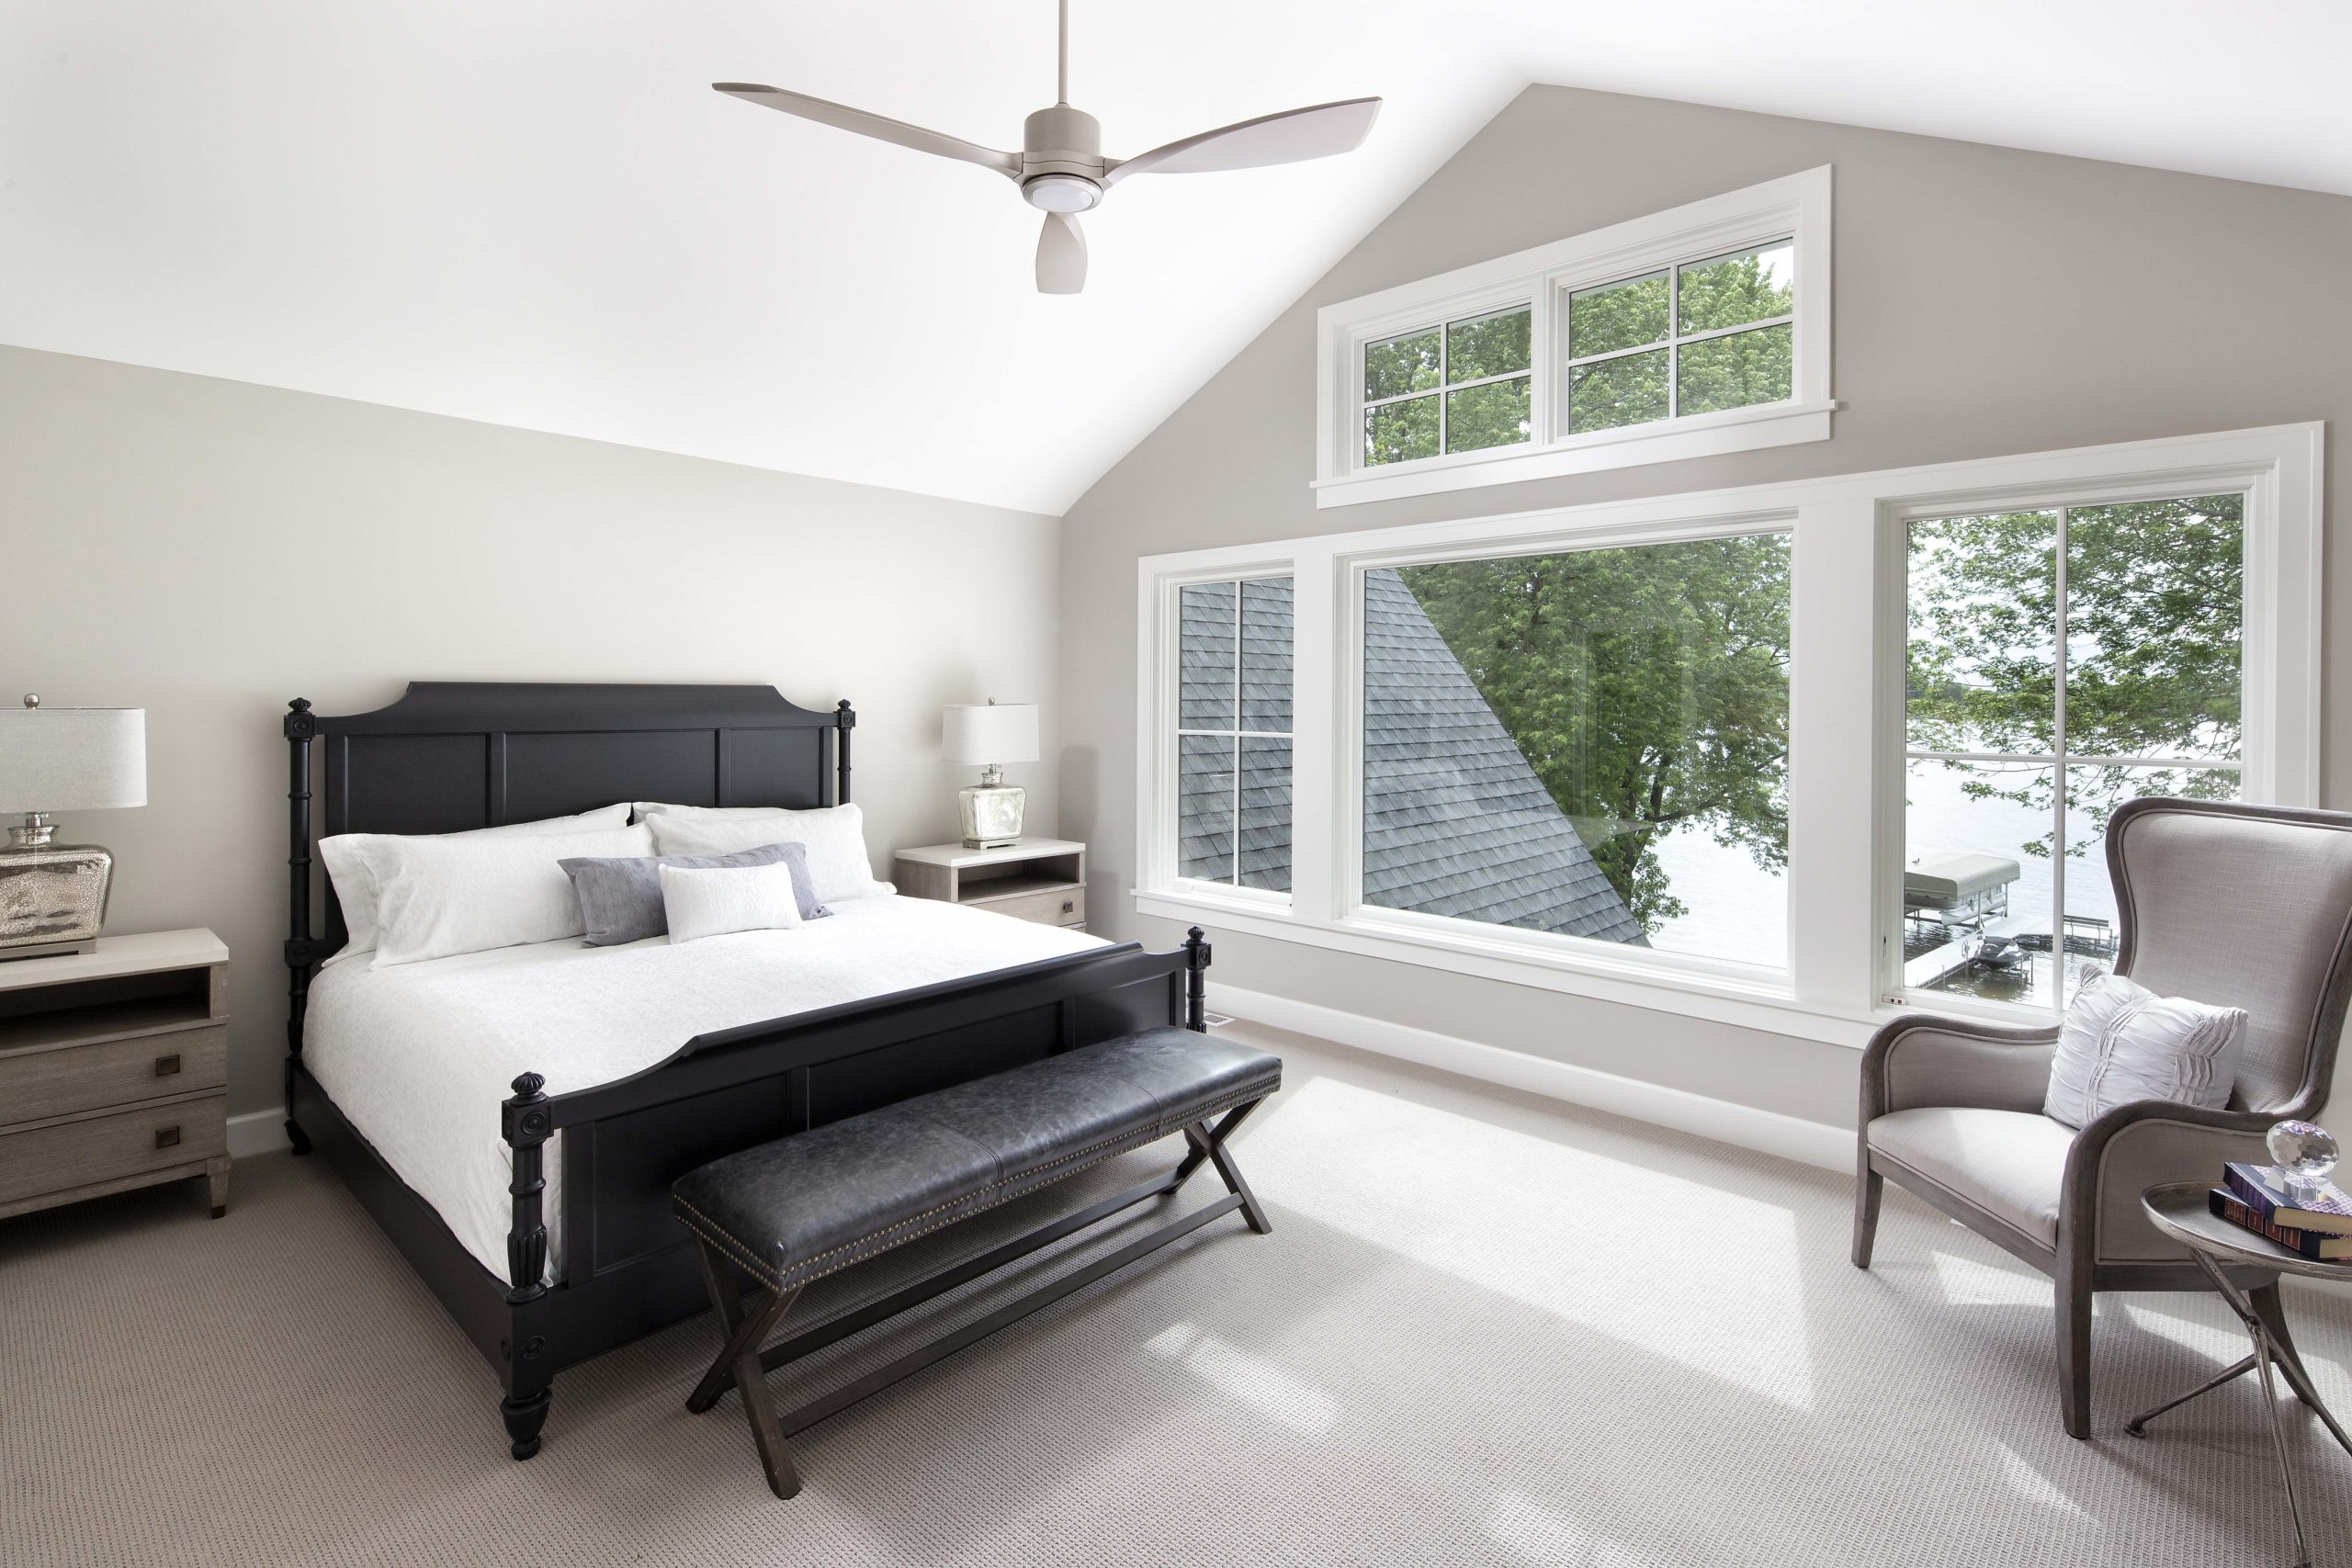 master bedroom with three large windows and a king size bed in the middle of the room